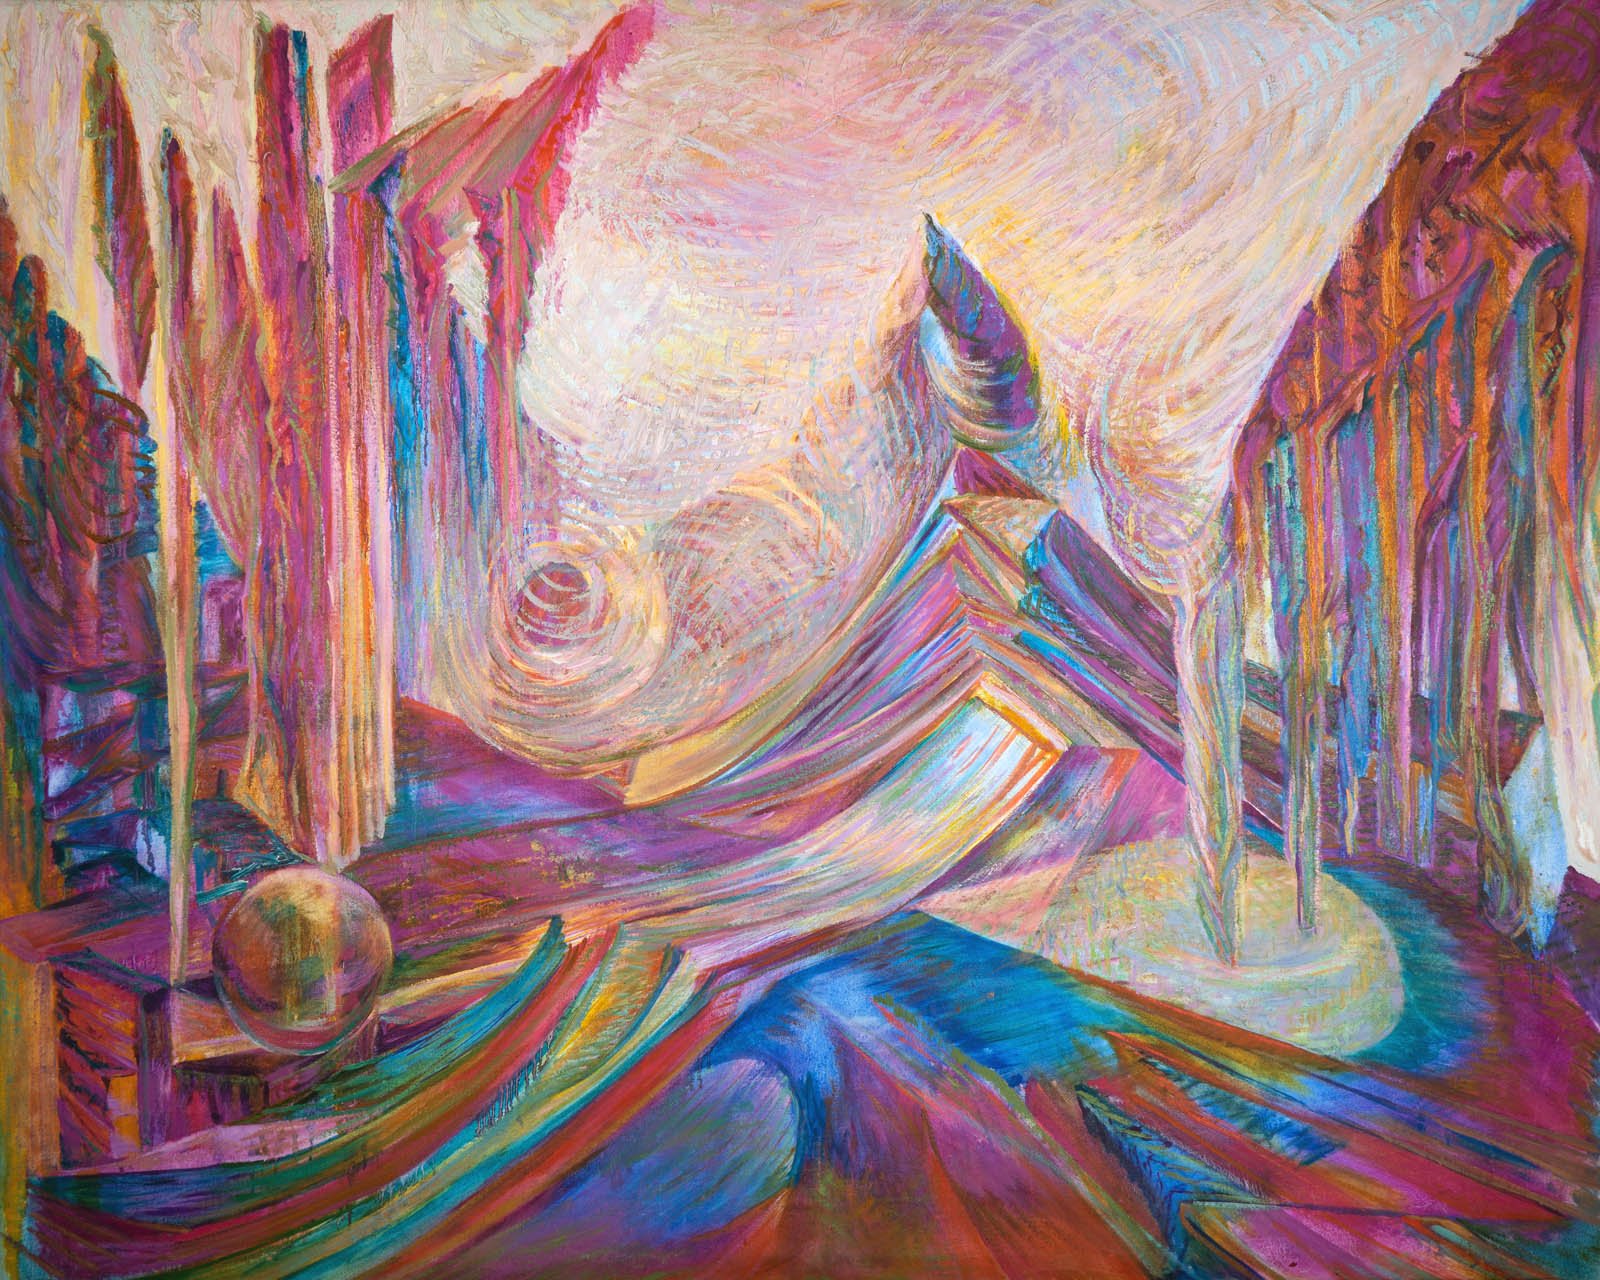   The Mountaintop  oil on canvas 54” x 68” 